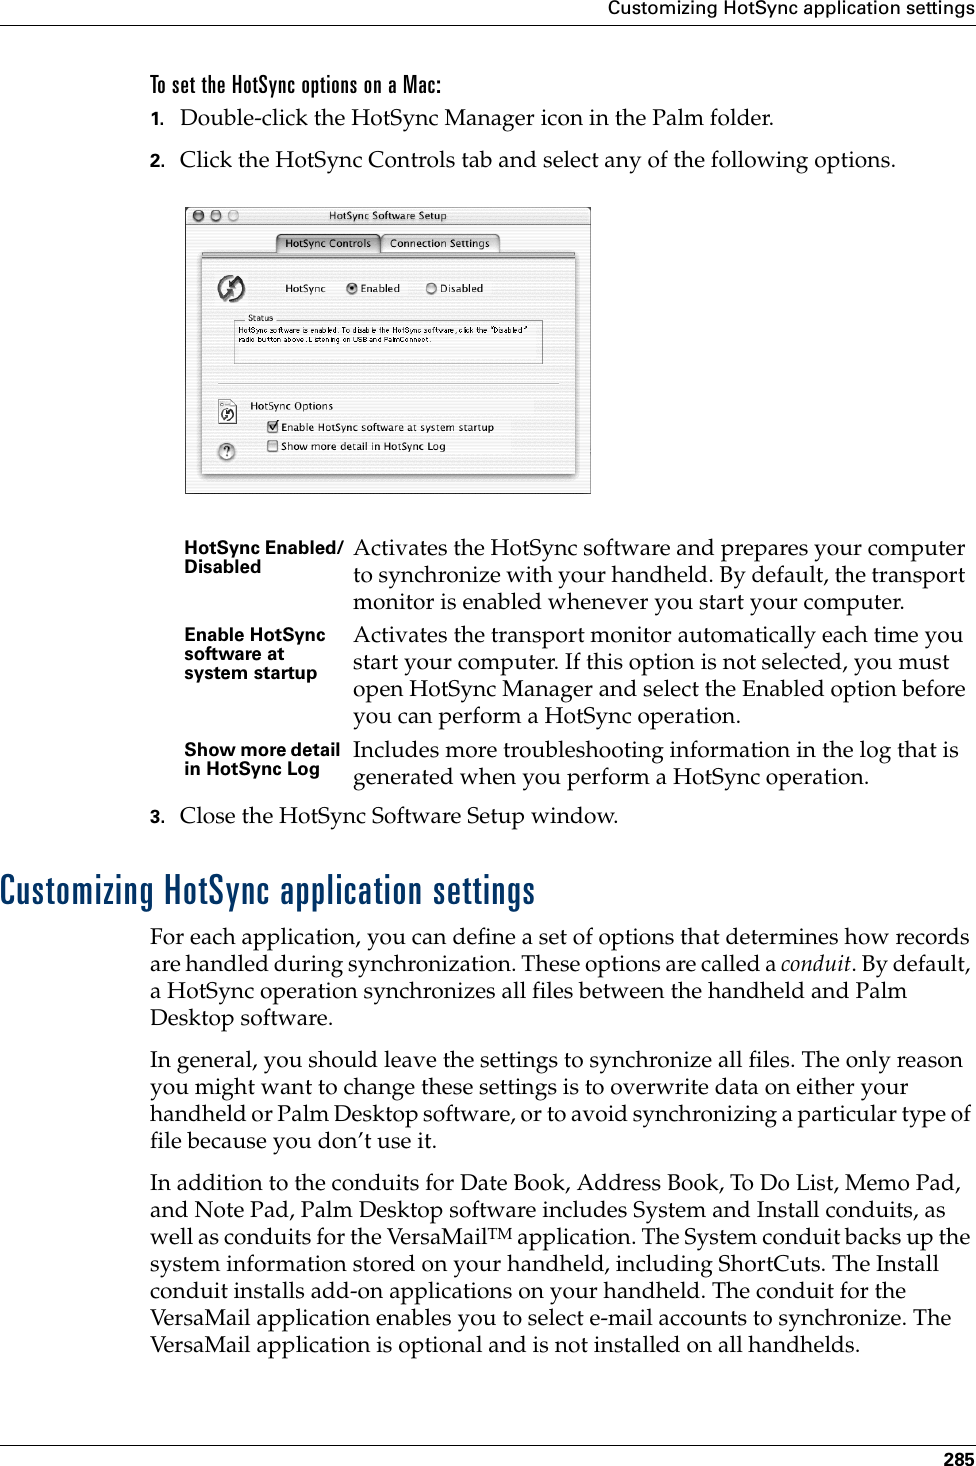 Customizing HotSync application settings285To set the HotSync options on a Mac:1. Double-click the HotSync Manager icon in the Palm folder.2. Click the HotSync Controls tab and select any of the following options.3. Close the HotSync Software Setup window. Customizing HotSync application settingsFor each application, you can define a set of options that determines how records are handled during synchronization. These options are called a conduit. By default, a HotSync operation synchronizes all files between the handheld and Palm Desktop software. In general, you should leave the settings to synchronize all files. The only reason you might want to change these settings is to overwrite data on either your handheld or Palm Desktop software, or to avoid synchronizing a particular type of file because you don’t use it.In addition to the conduits for Date Book, Address Book, To Do List, Memo Pad, and Note Pad, Palm Desktop software includes System and Install conduits, as well as conduits for the VersaMailTM application. The System conduit backs up the system information stored on your handheld, including ShortCuts. The Install conduit installs add-on applications on your handheld. The conduit for the VersaMail application enables you to select e-mail accounts to synchronize. The VersaMail application is optional and is not installed on all handhelds.HotSync Enabled/Disabled Activates the HotSync software and prepares your computer to synchronize with your handheld. By default, the transport monitor is enabled whenever you start your computer. Enable HotSync software at system startupActivates the transport monitor automatically each time you start your computer. If this option is not selected, you must open HotSync Manager and select the Enabled option before you can perform a HotSync operation.Show more detail in HotSync Log Includes more troubleshooting information in the log that is generated when you perform a HotSync operation.Palm, Inc. Confidential